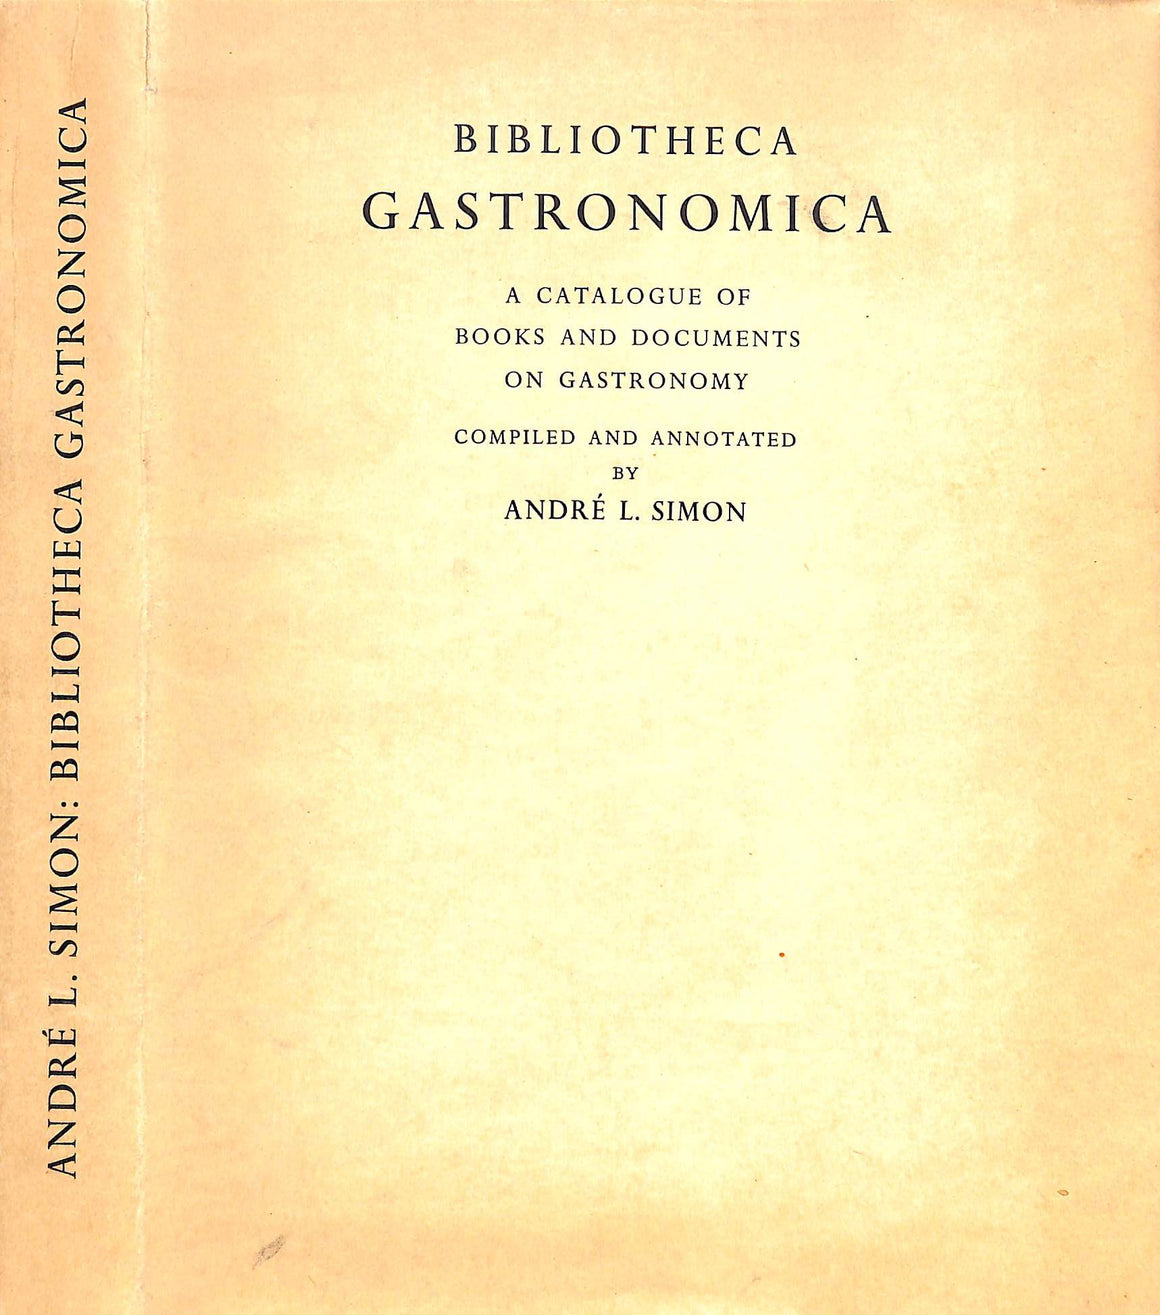 "Bibliotheca Gastronomica: A Catalogue Of Books And Documents On Gastronomy (INSCRIBED)" 1953 SIMON, Andre L.